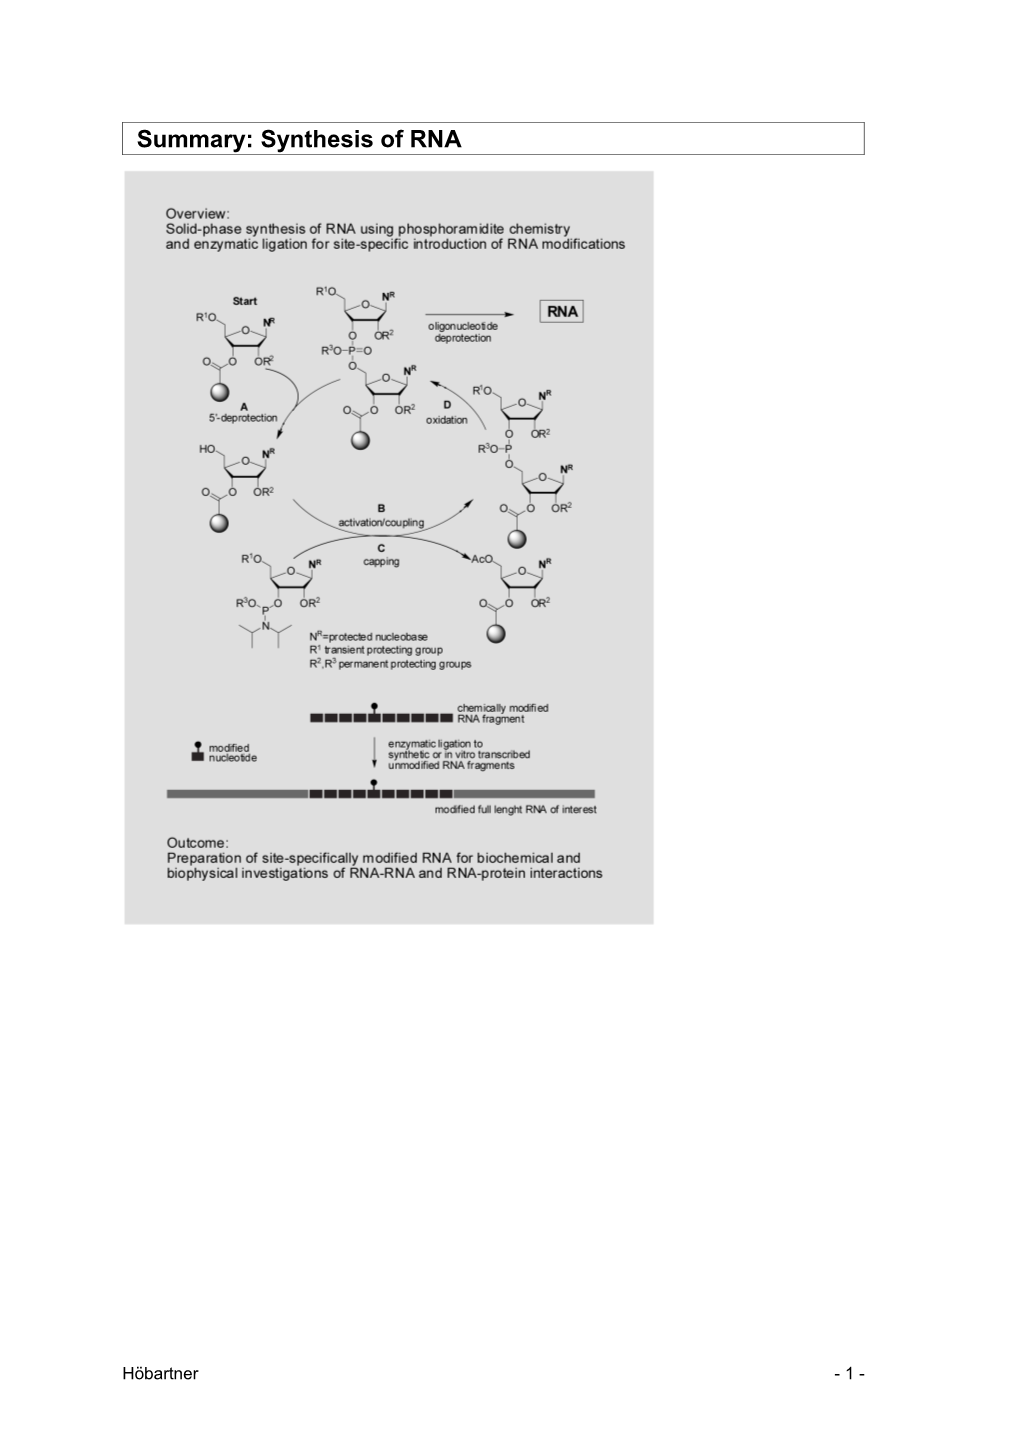 Synthesis of RNA